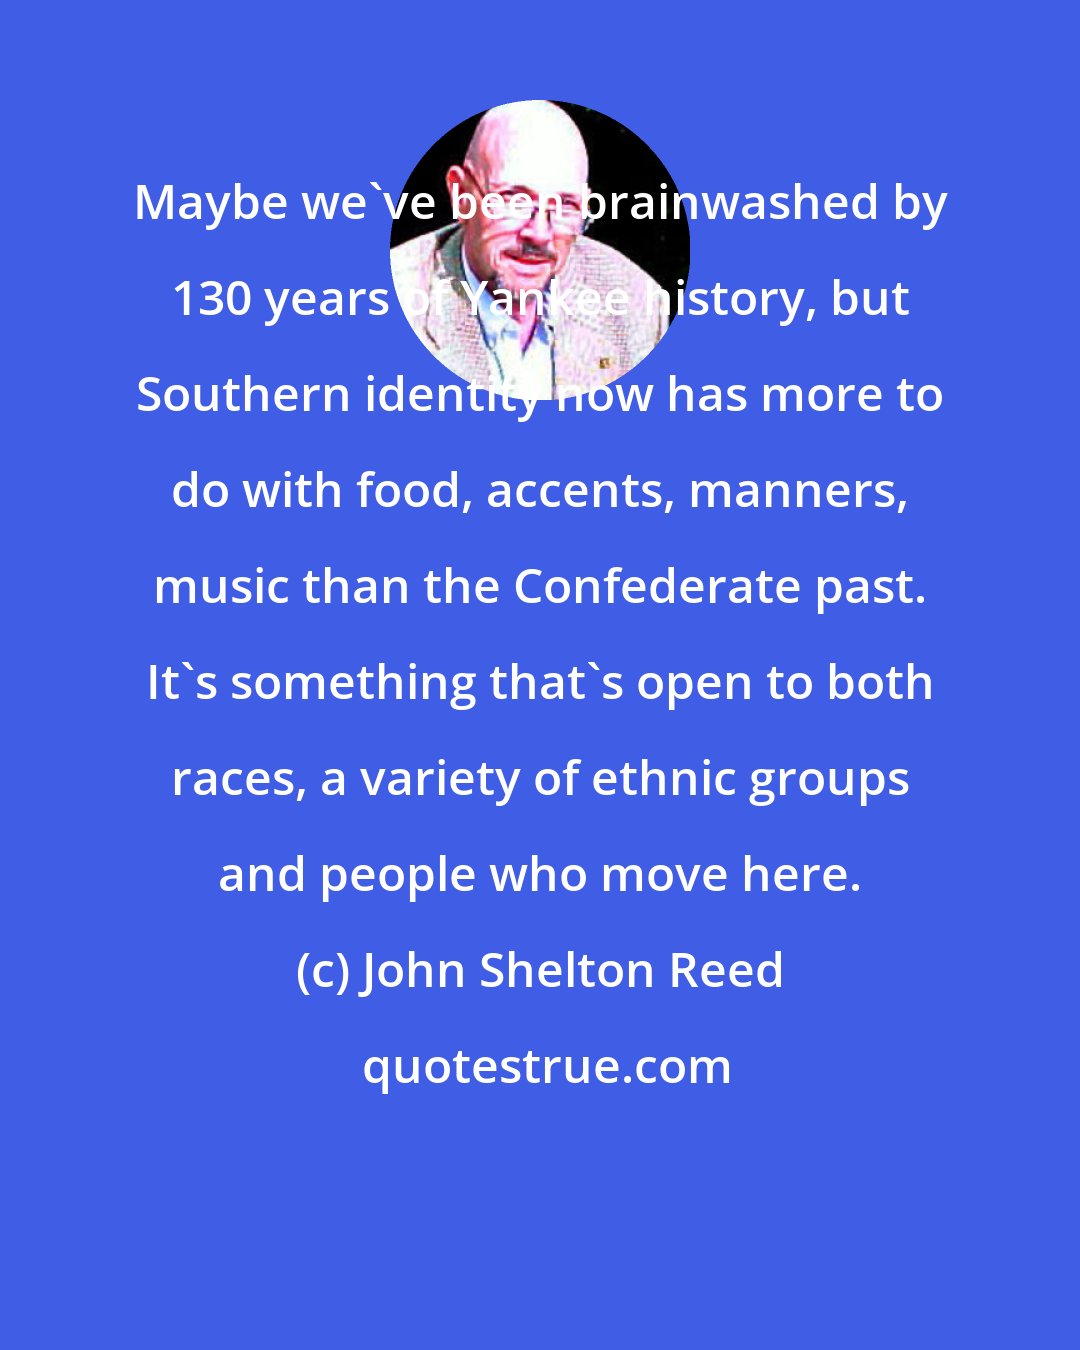 John Shelton Reed: Maybe we've been brainwashed by 130 years of Yankee history, but Southern identity now has more to do with food, accents, manners, music than the Confederate past. It's something that's open to both races, a variety of ethnic groups and people who move here.